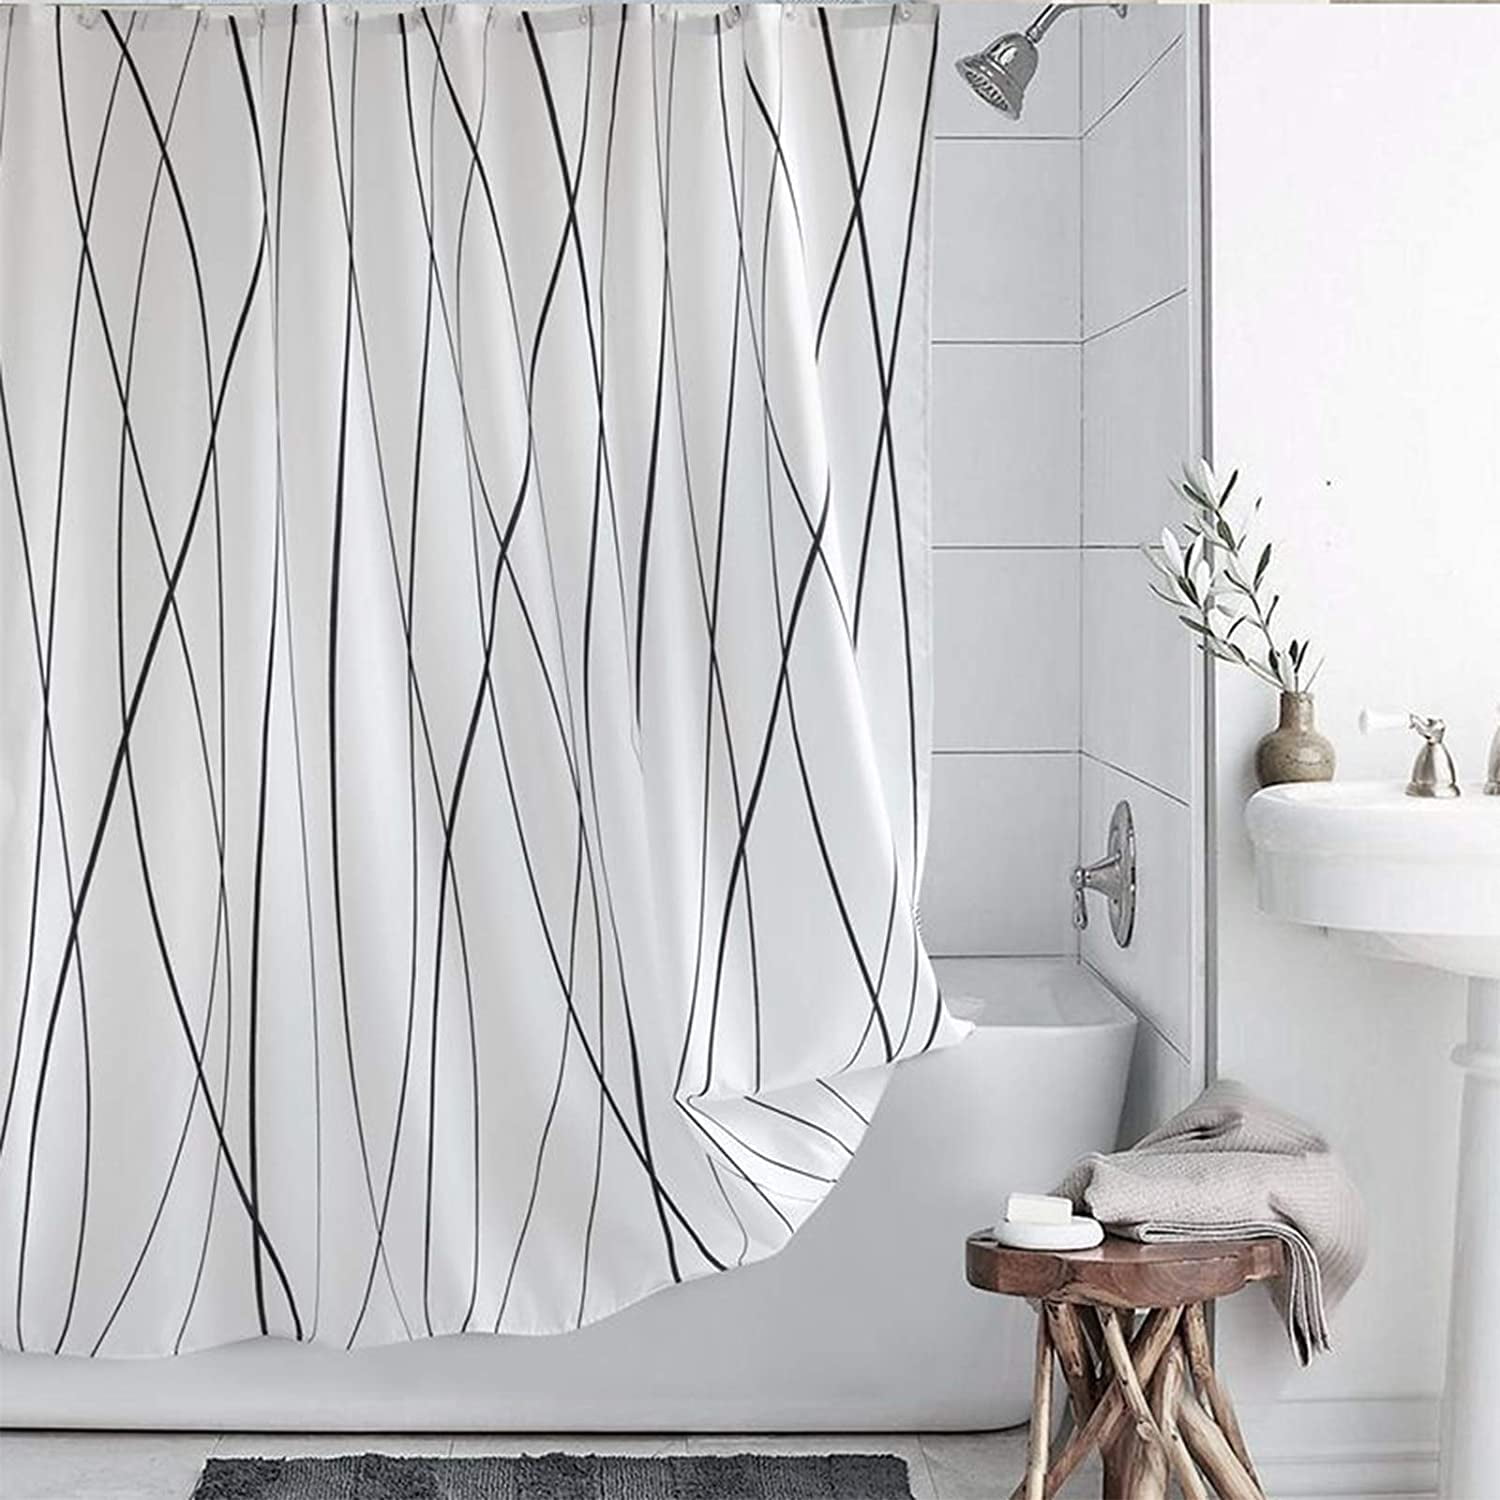 Black and White Stripe Waterproof Polyester Fabric Shower Curtain 72 x 72 Inch 